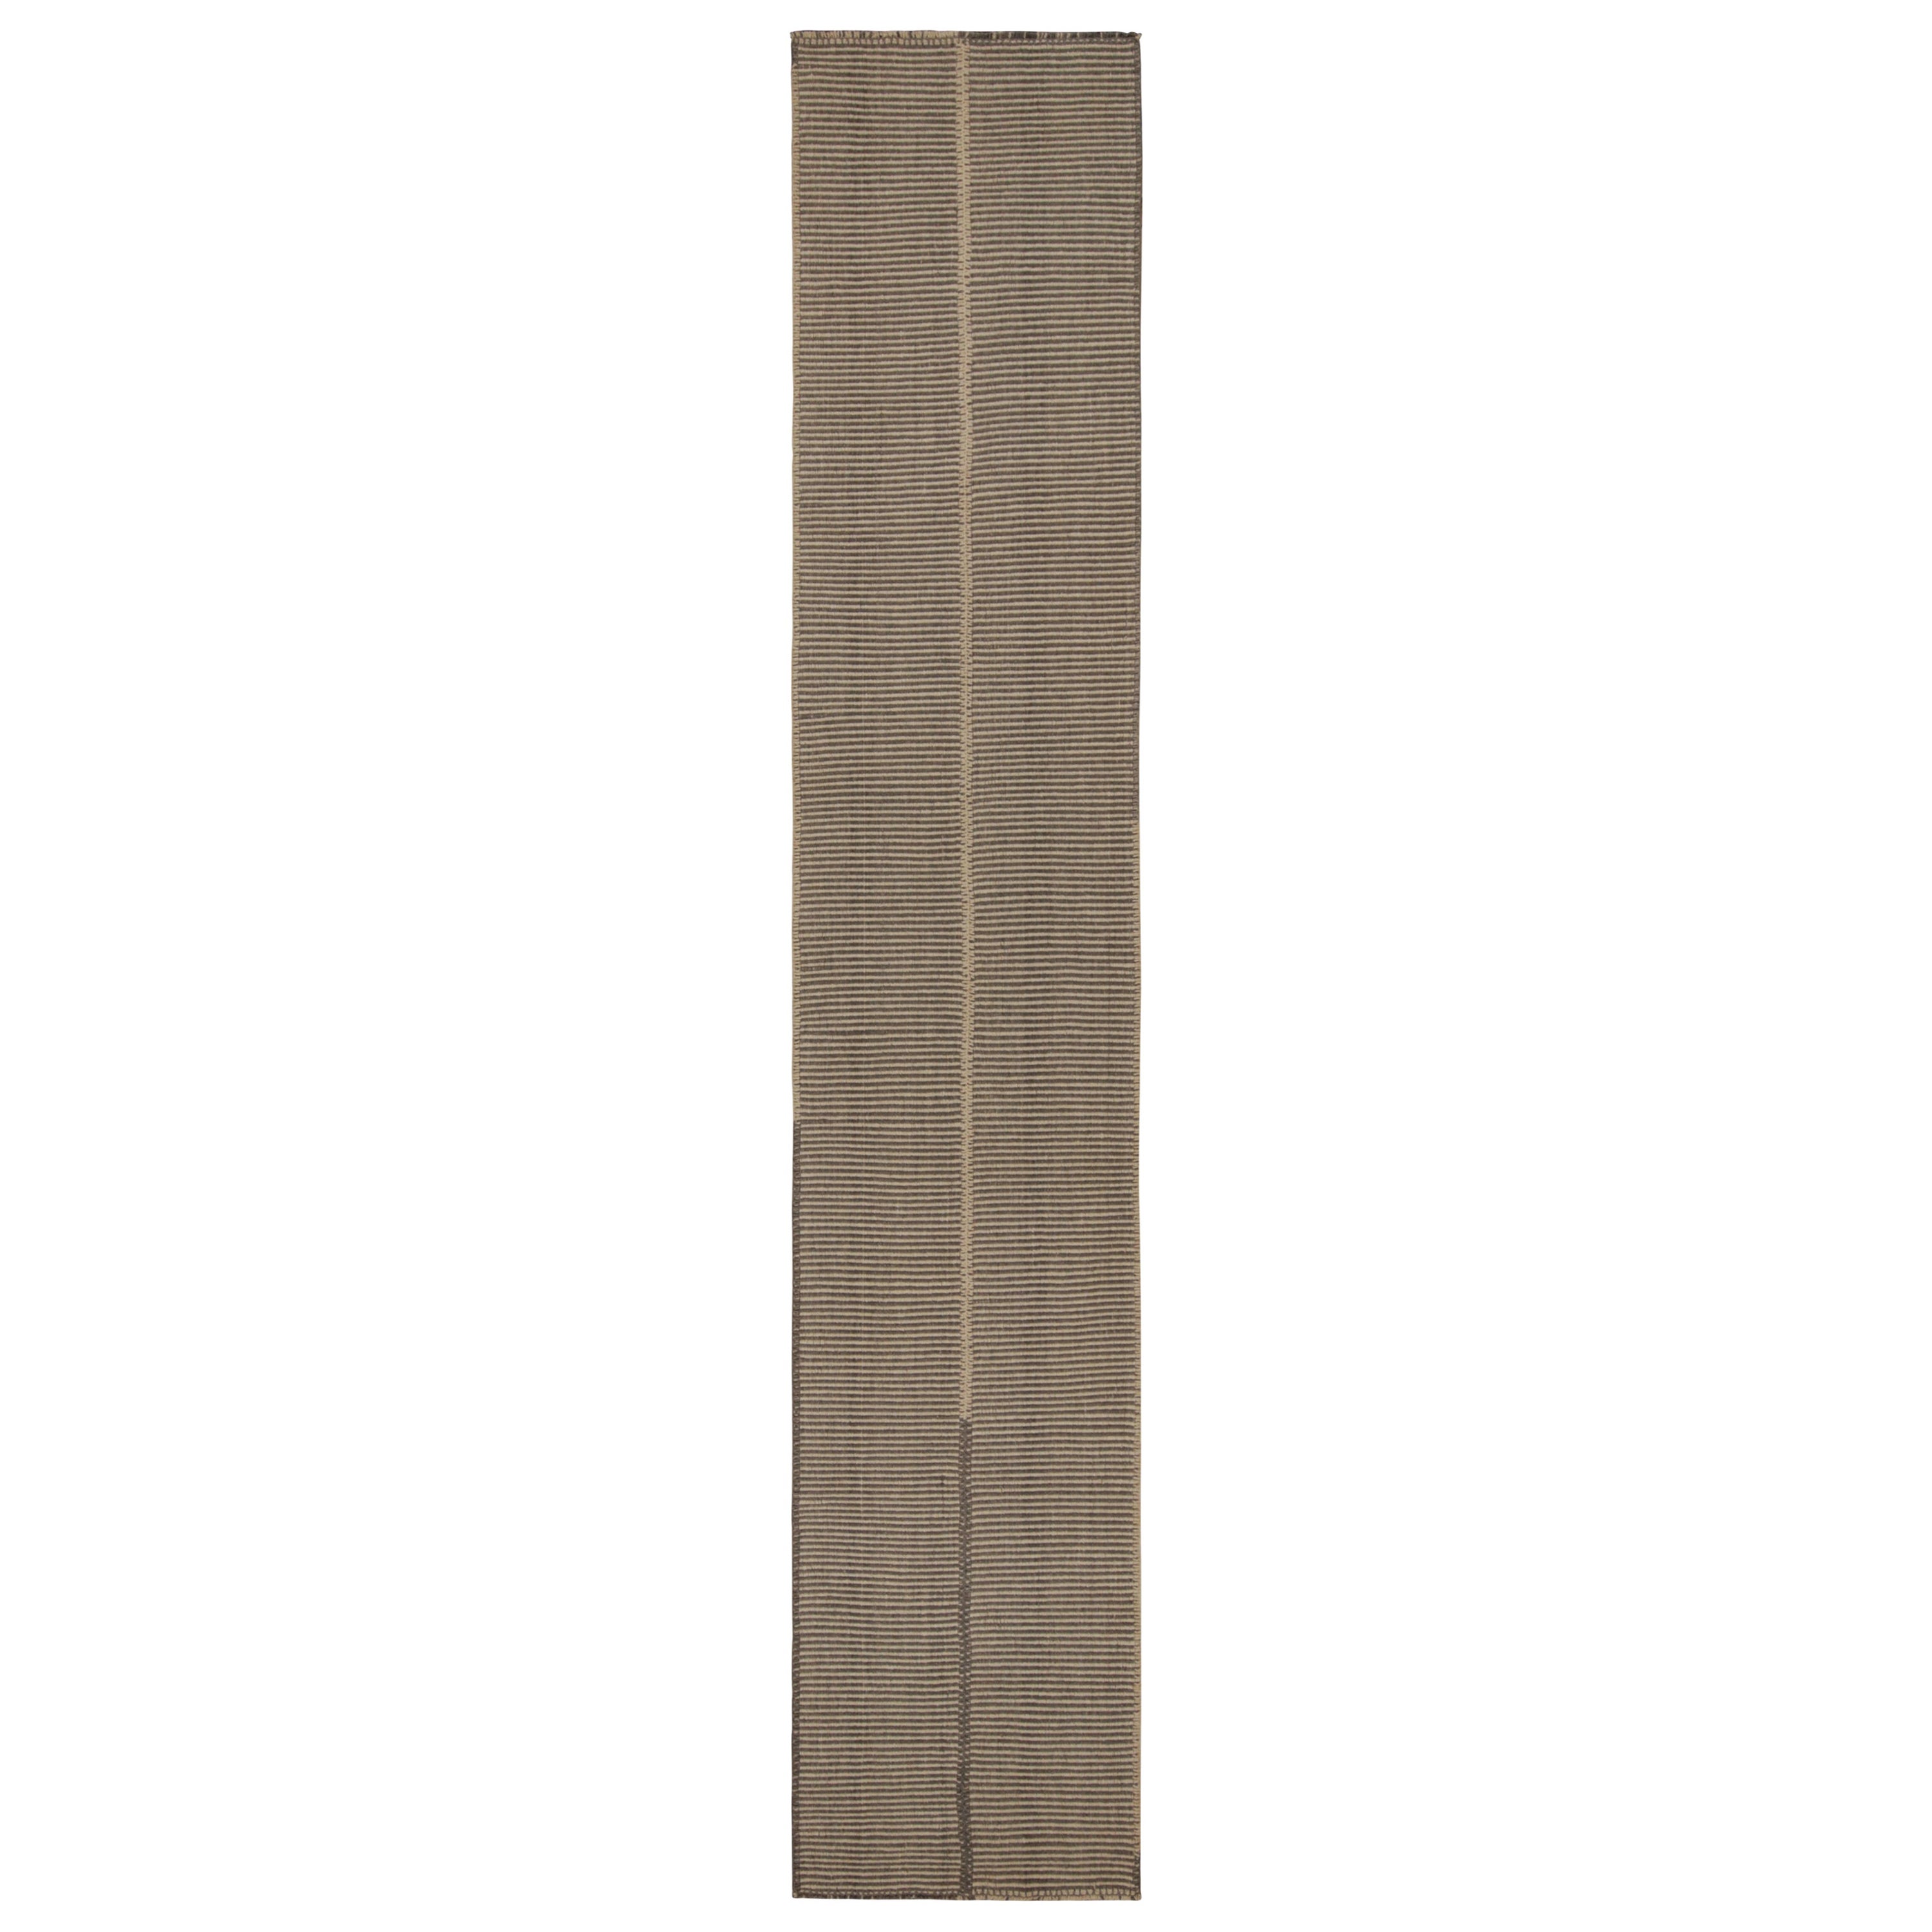 Rug & Kilim’s Contemporary Kilim Extra-Long Runner Rug, in Gray and Beige